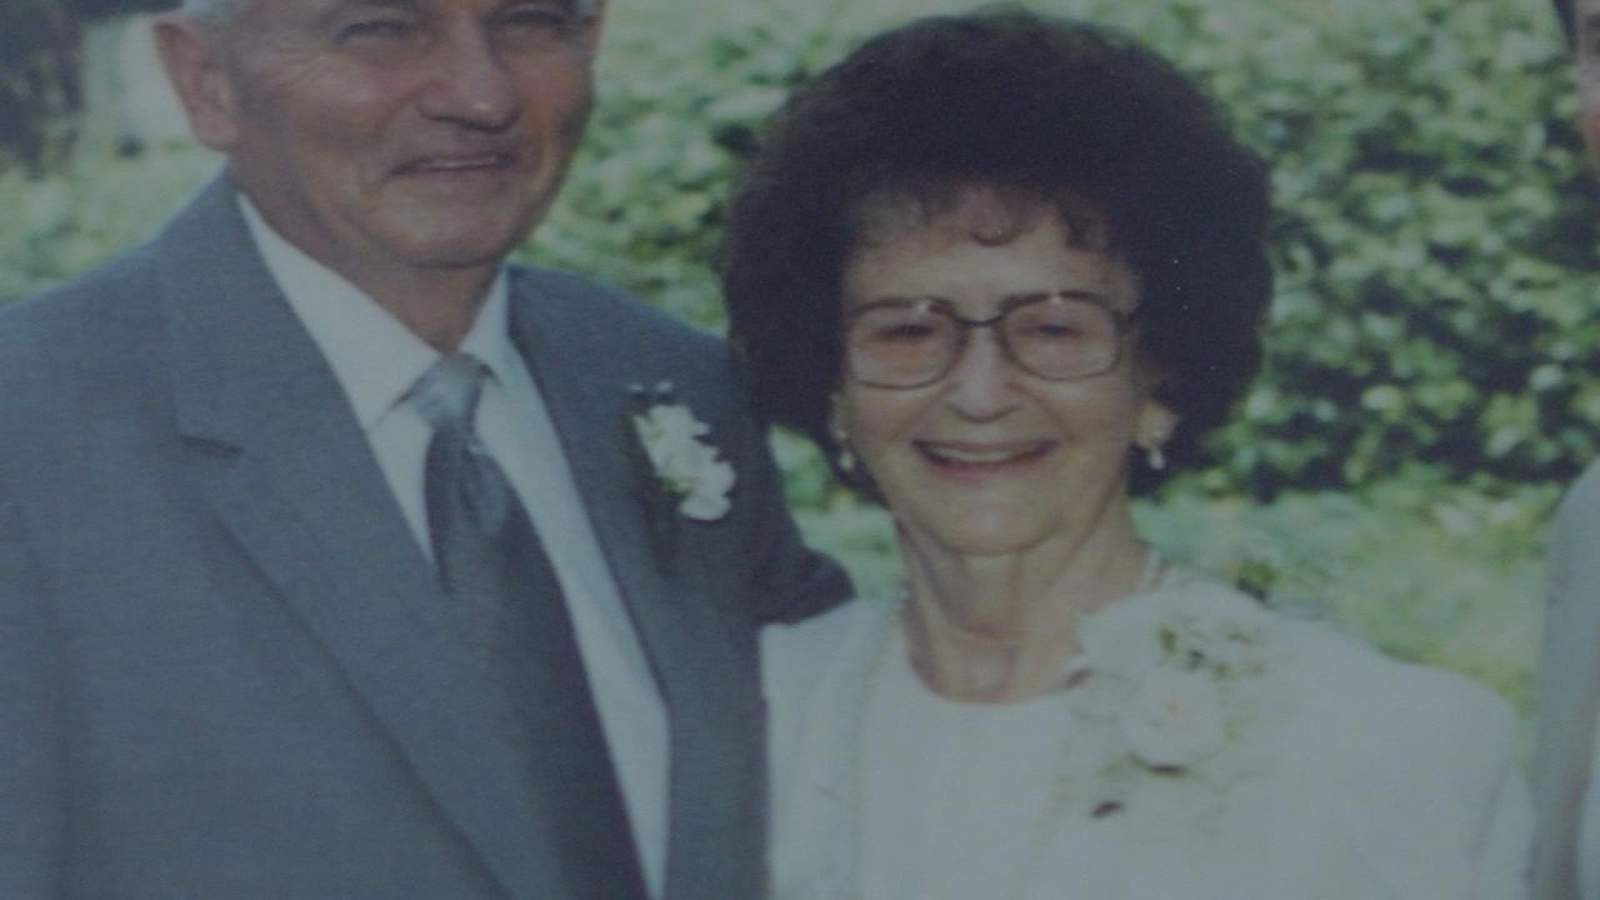 A Jacksonville woman describes the final weeks of her 99-year-old mother's life